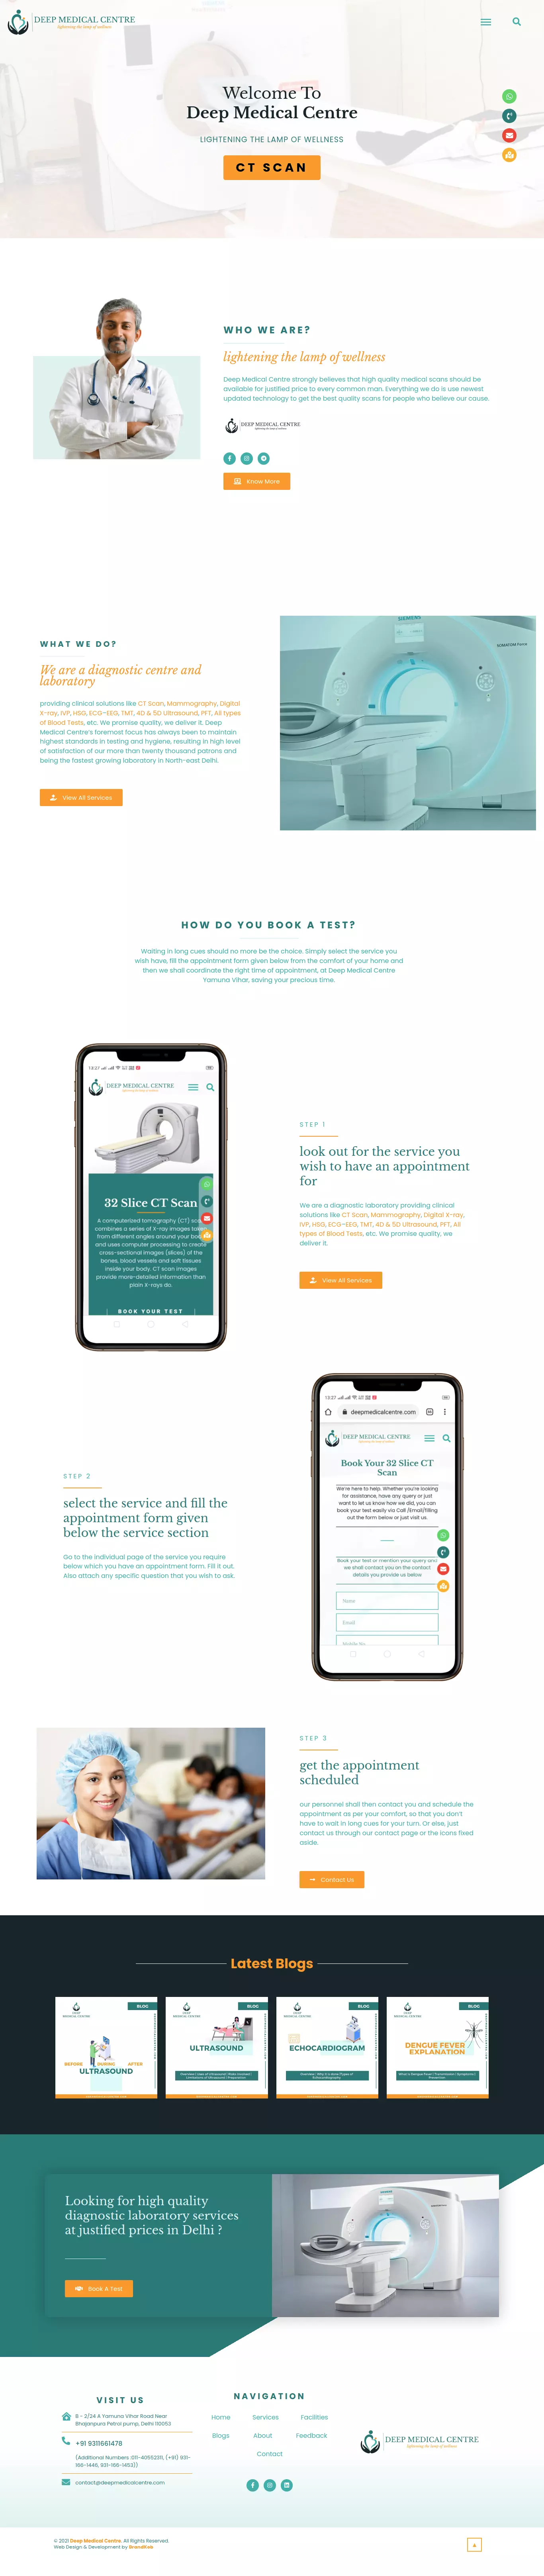 BrandKob Projects - Deep Medical Centre Homepage